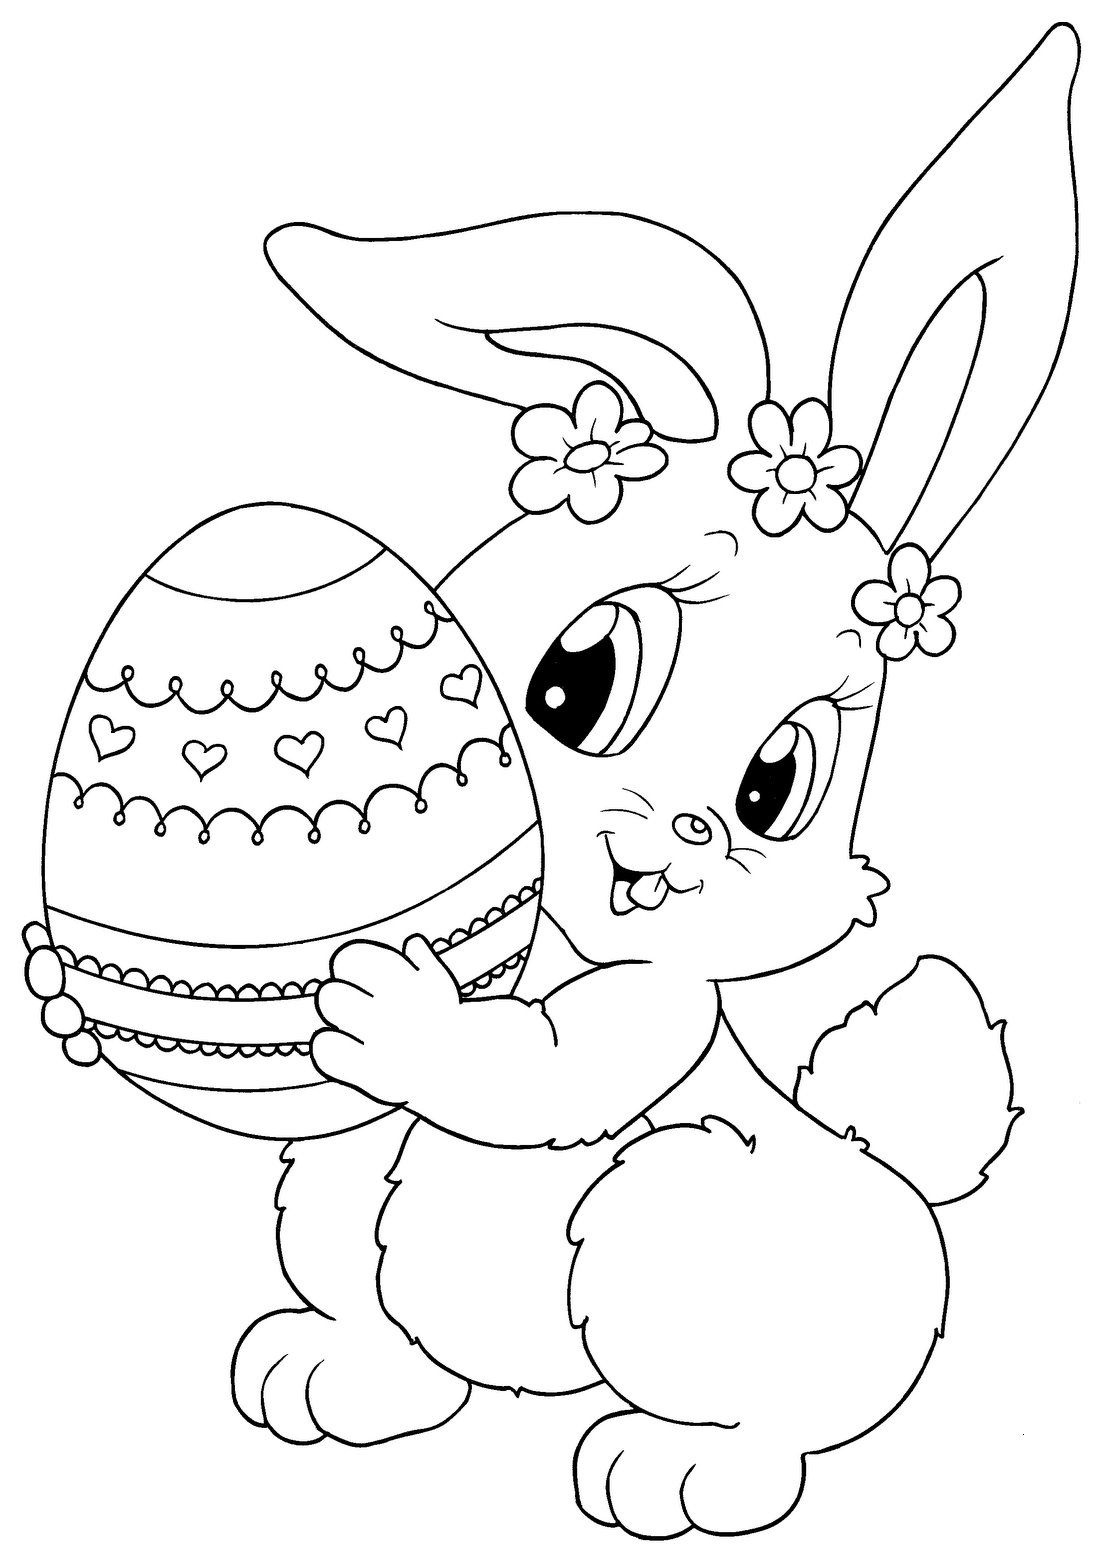 Top 15 Free Printable Easter Bunny Coloring Pages Online | Spring - Free Printable Easter Colouring Sheets